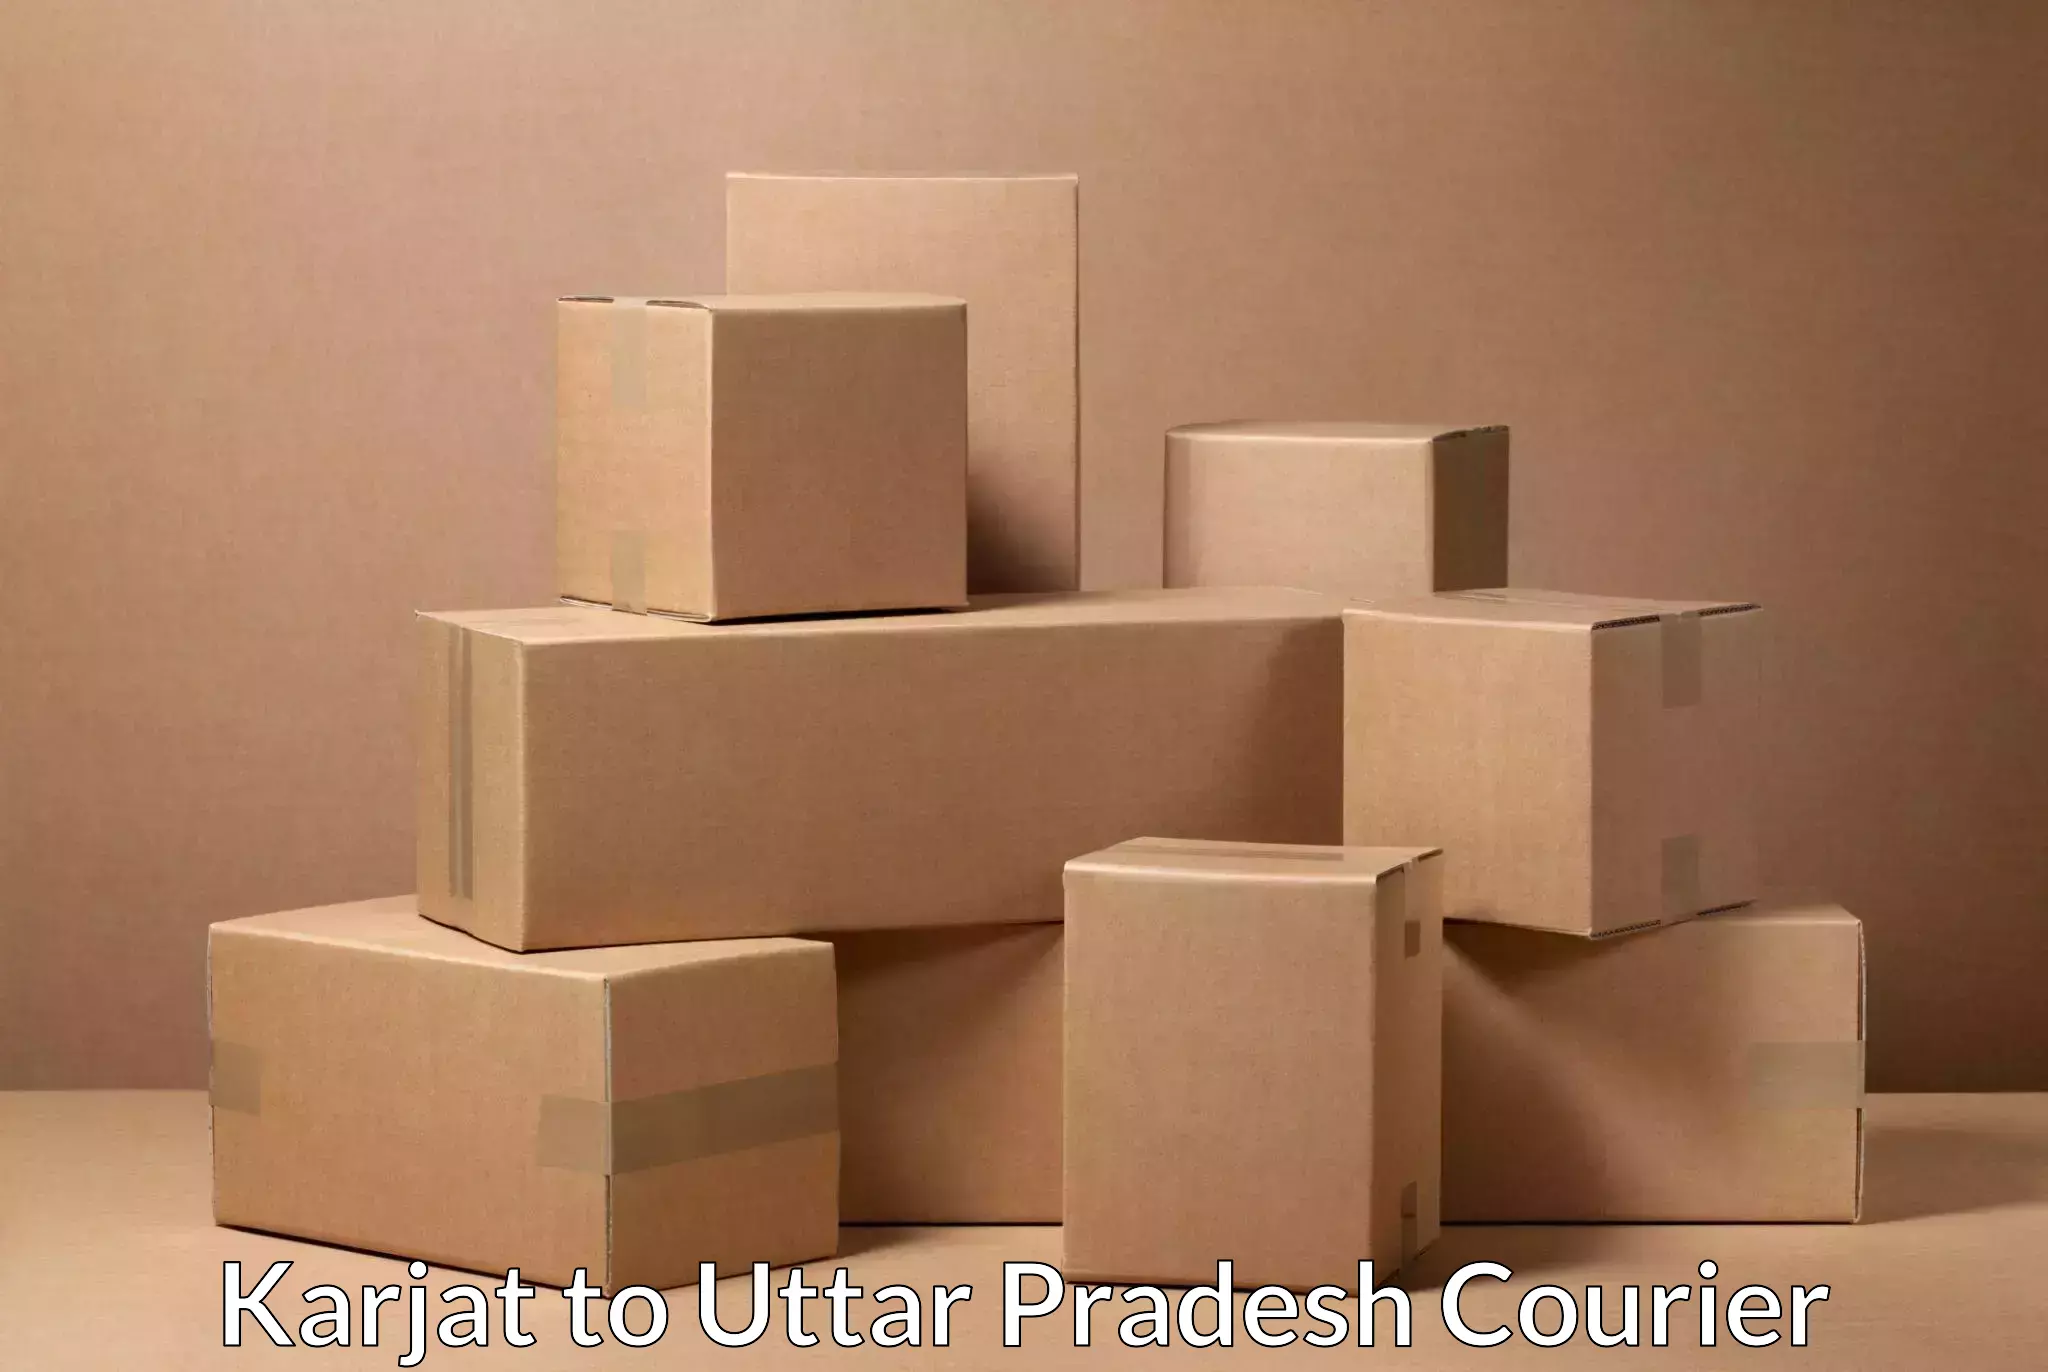 Easy access courier services Karjat to Mehnagar